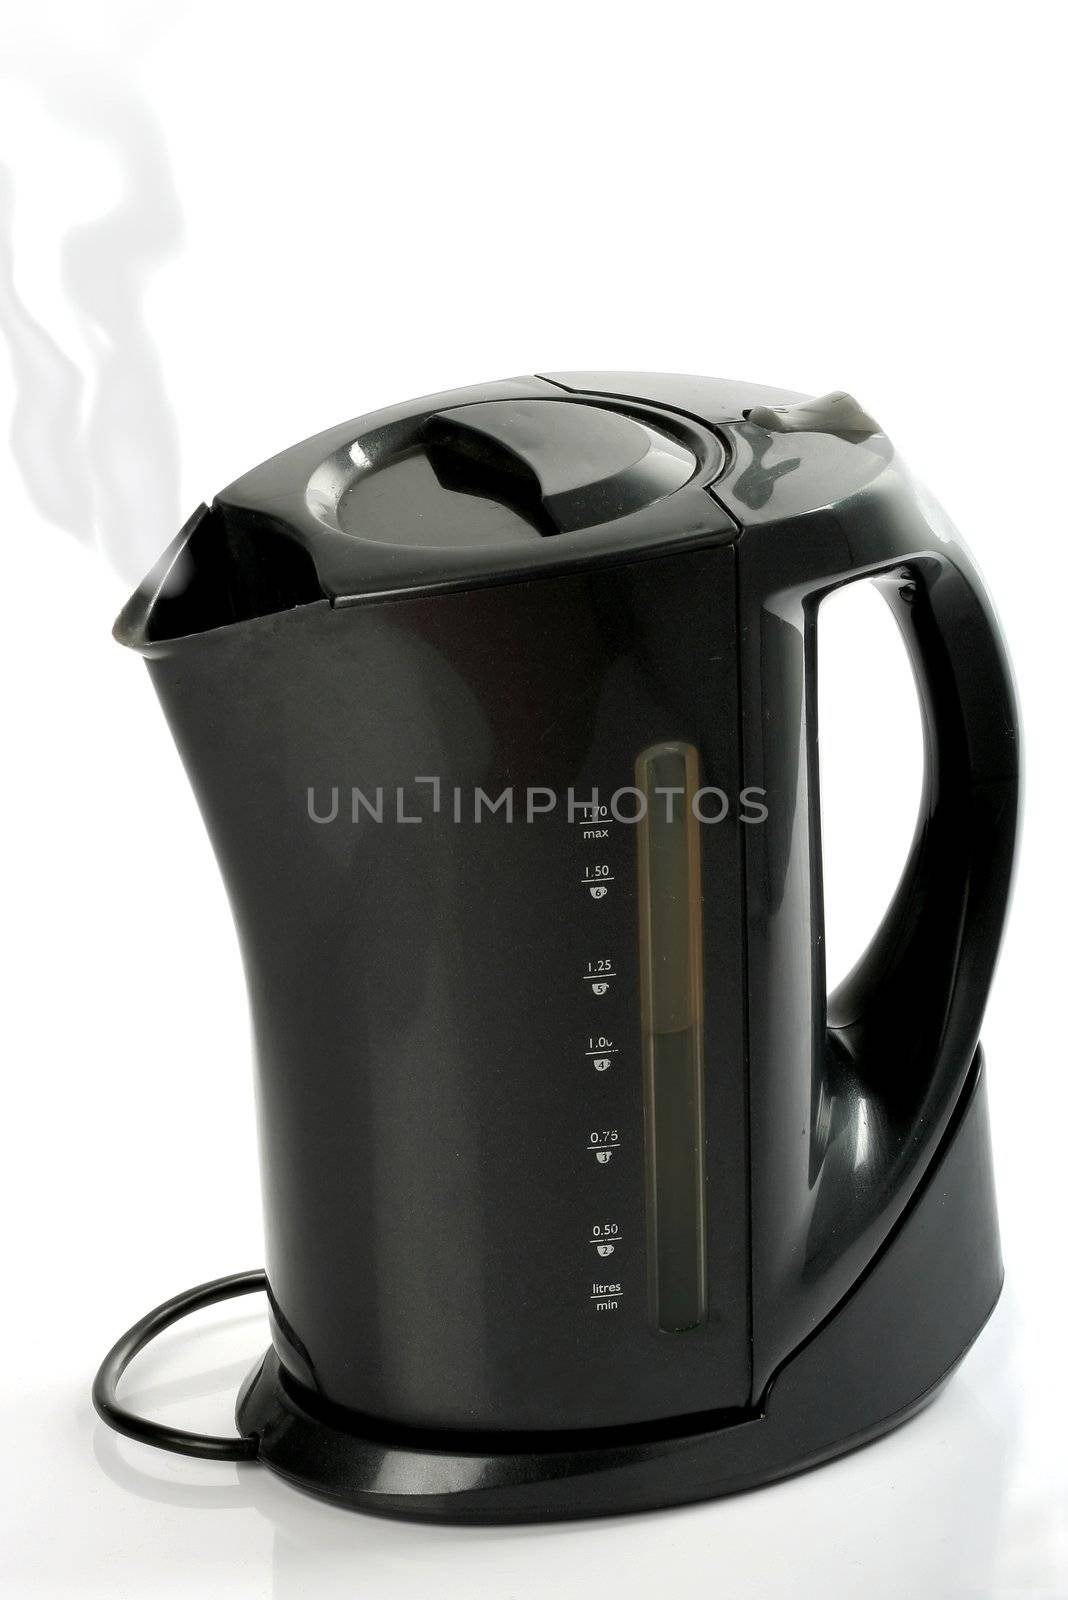 Black electric kettle with steam coming out of the spout